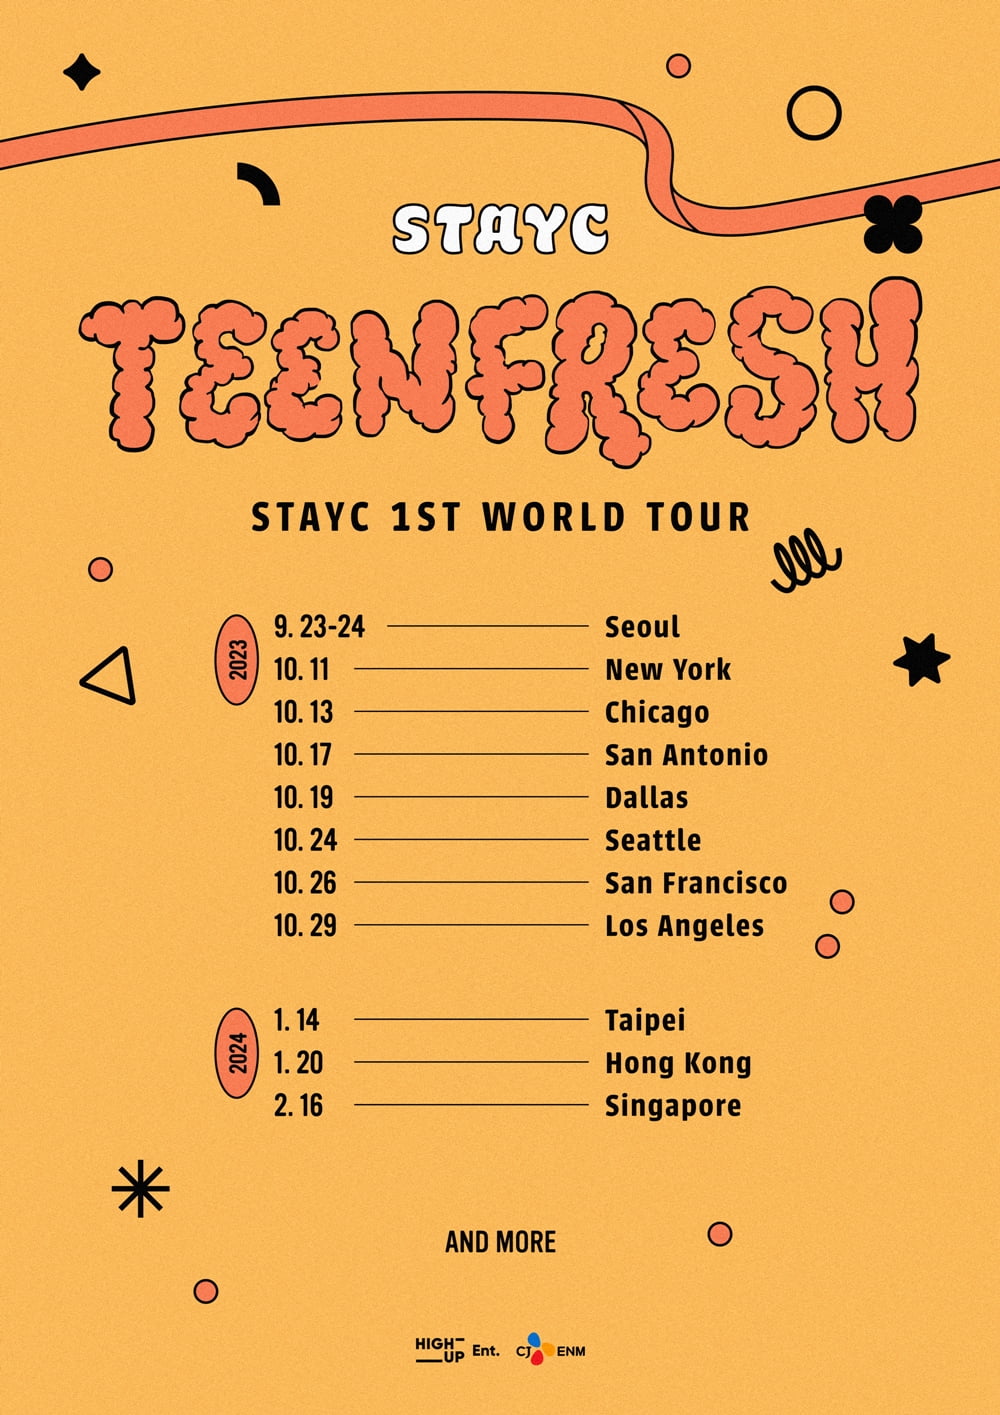 STAYC's first world tour 'TEENFRESH' sold out in 3 US cities